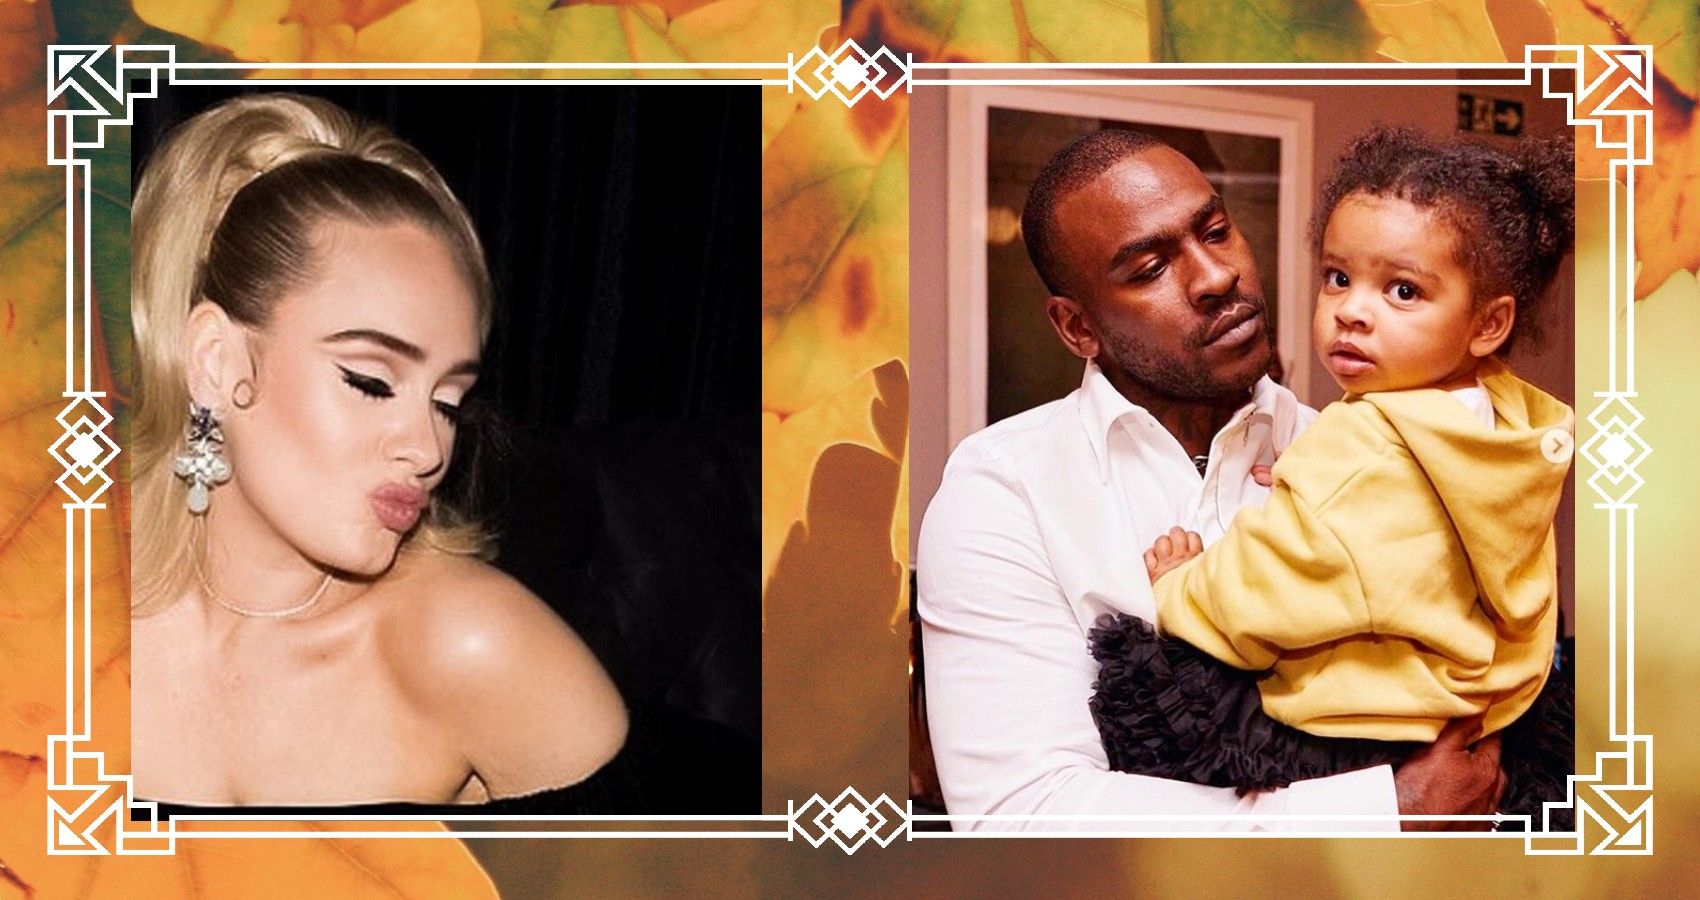 Adele Skepta Bond Over Being Parents To Young Kids In London